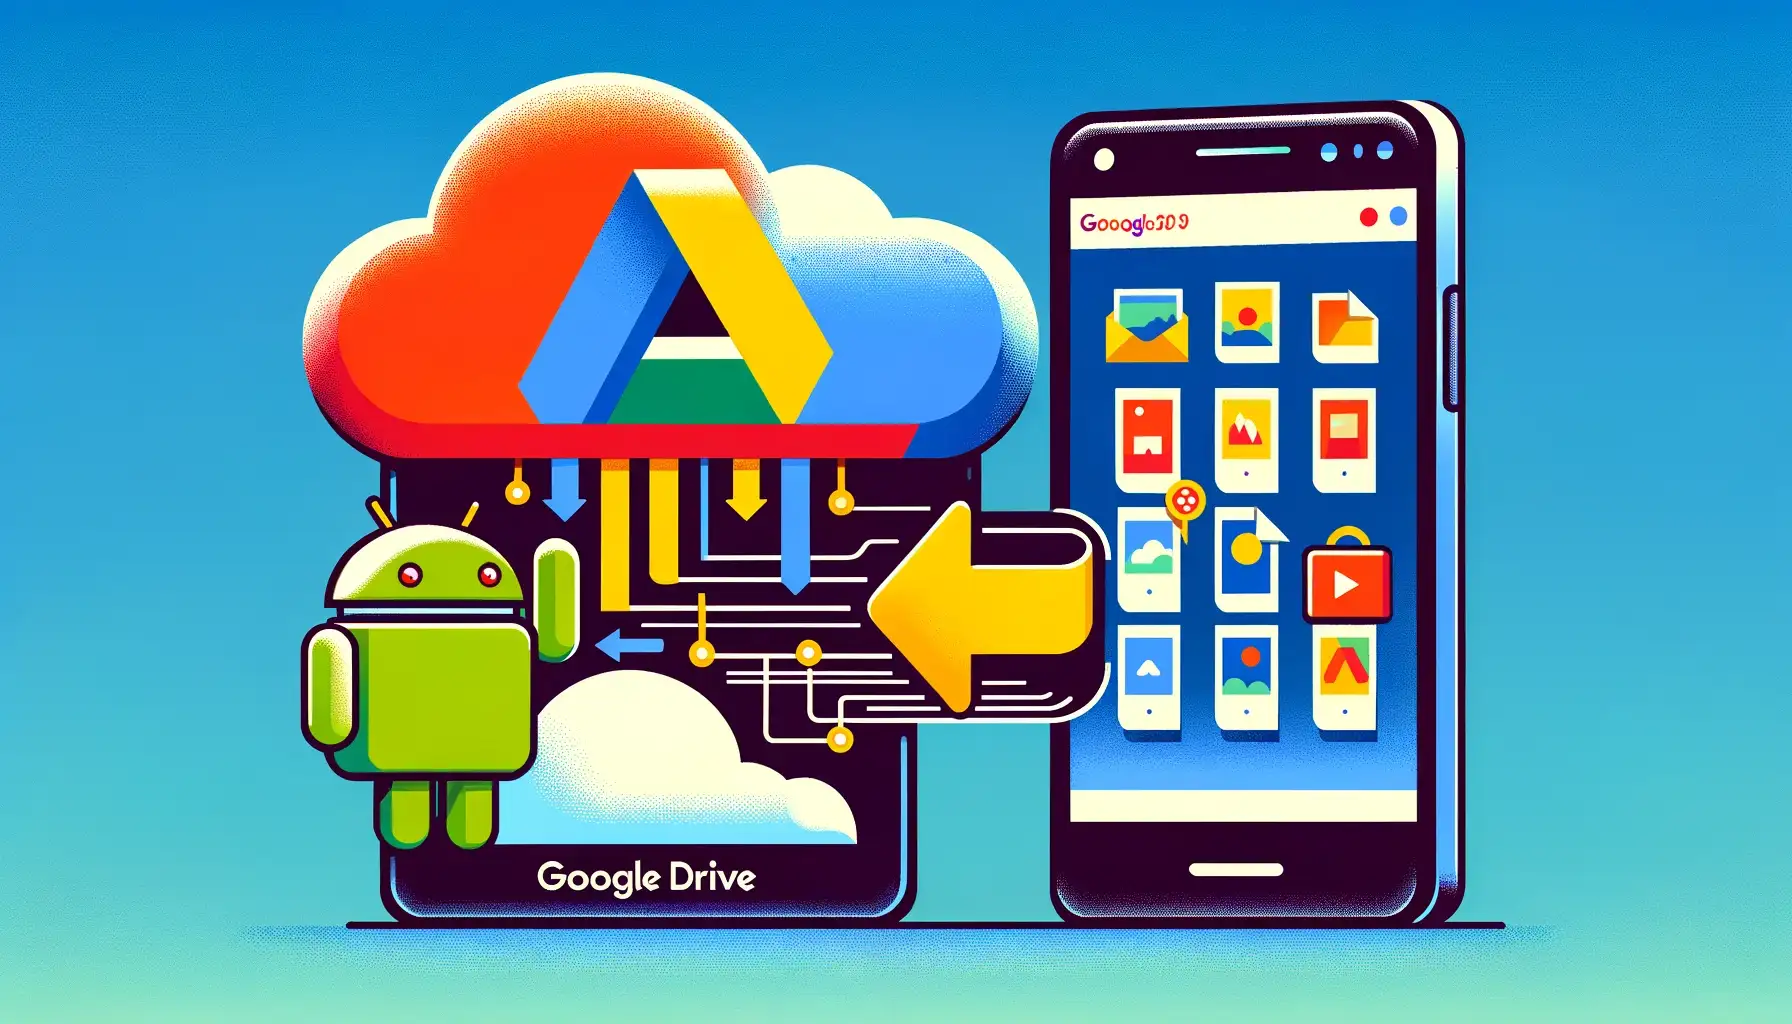 How to upload an album from Android phone to Google Drive